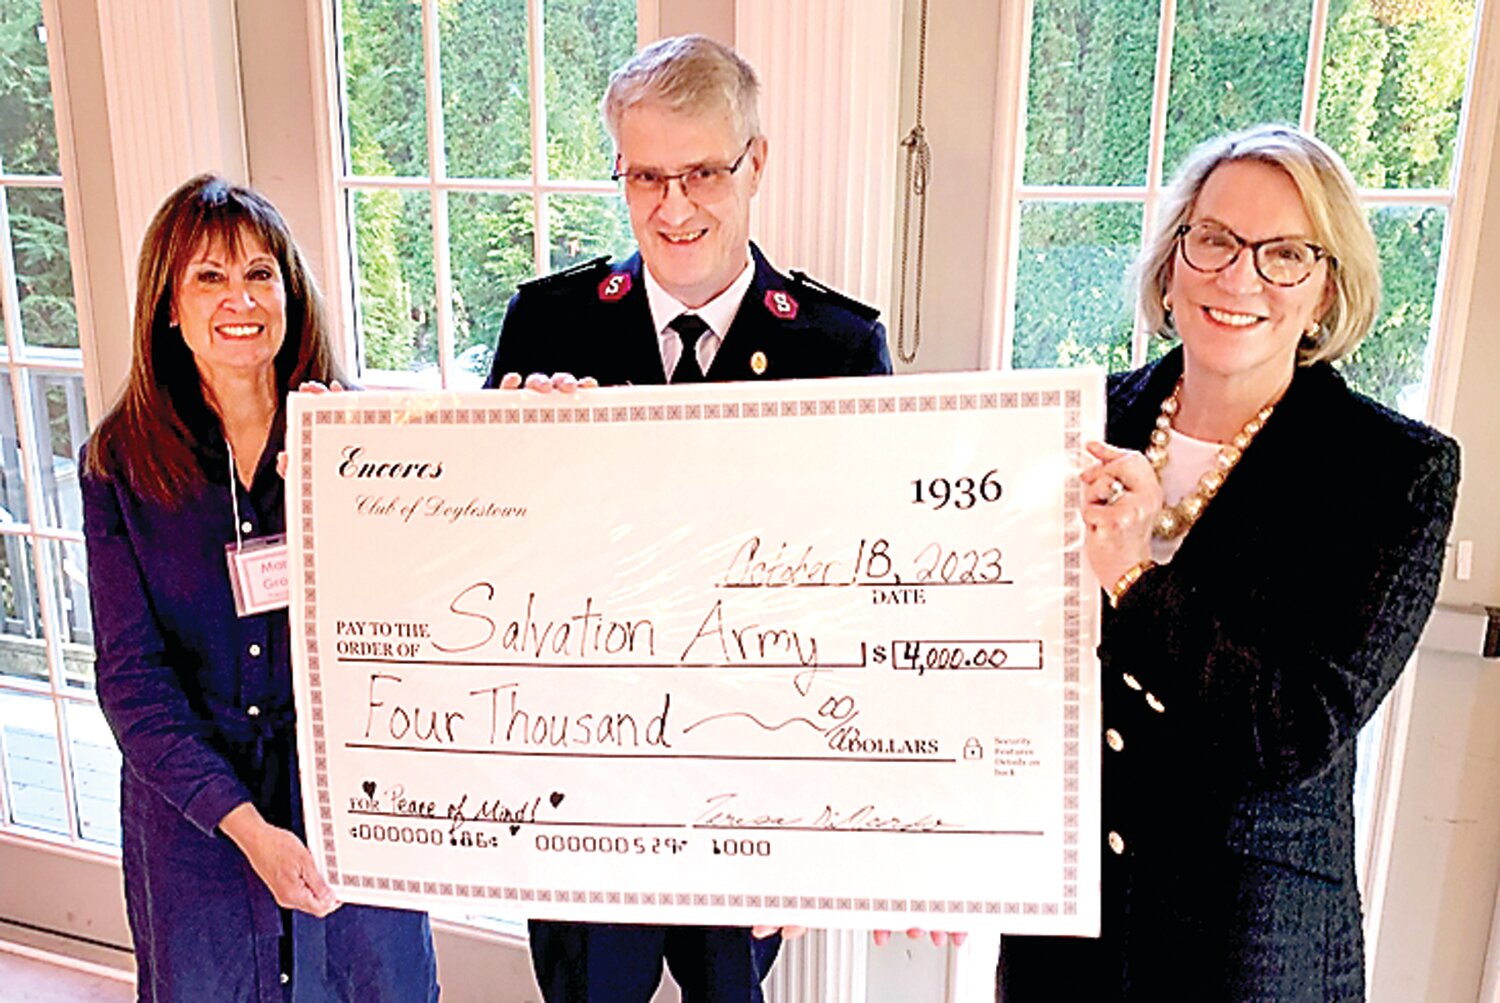 From left are: Mary Gross, Encores of Doylestown president; Major Duane Harris of the Salvation Army Levittown Corps and Beth Reynolds of Encore of Doylestown’s Ways and Means Committee.